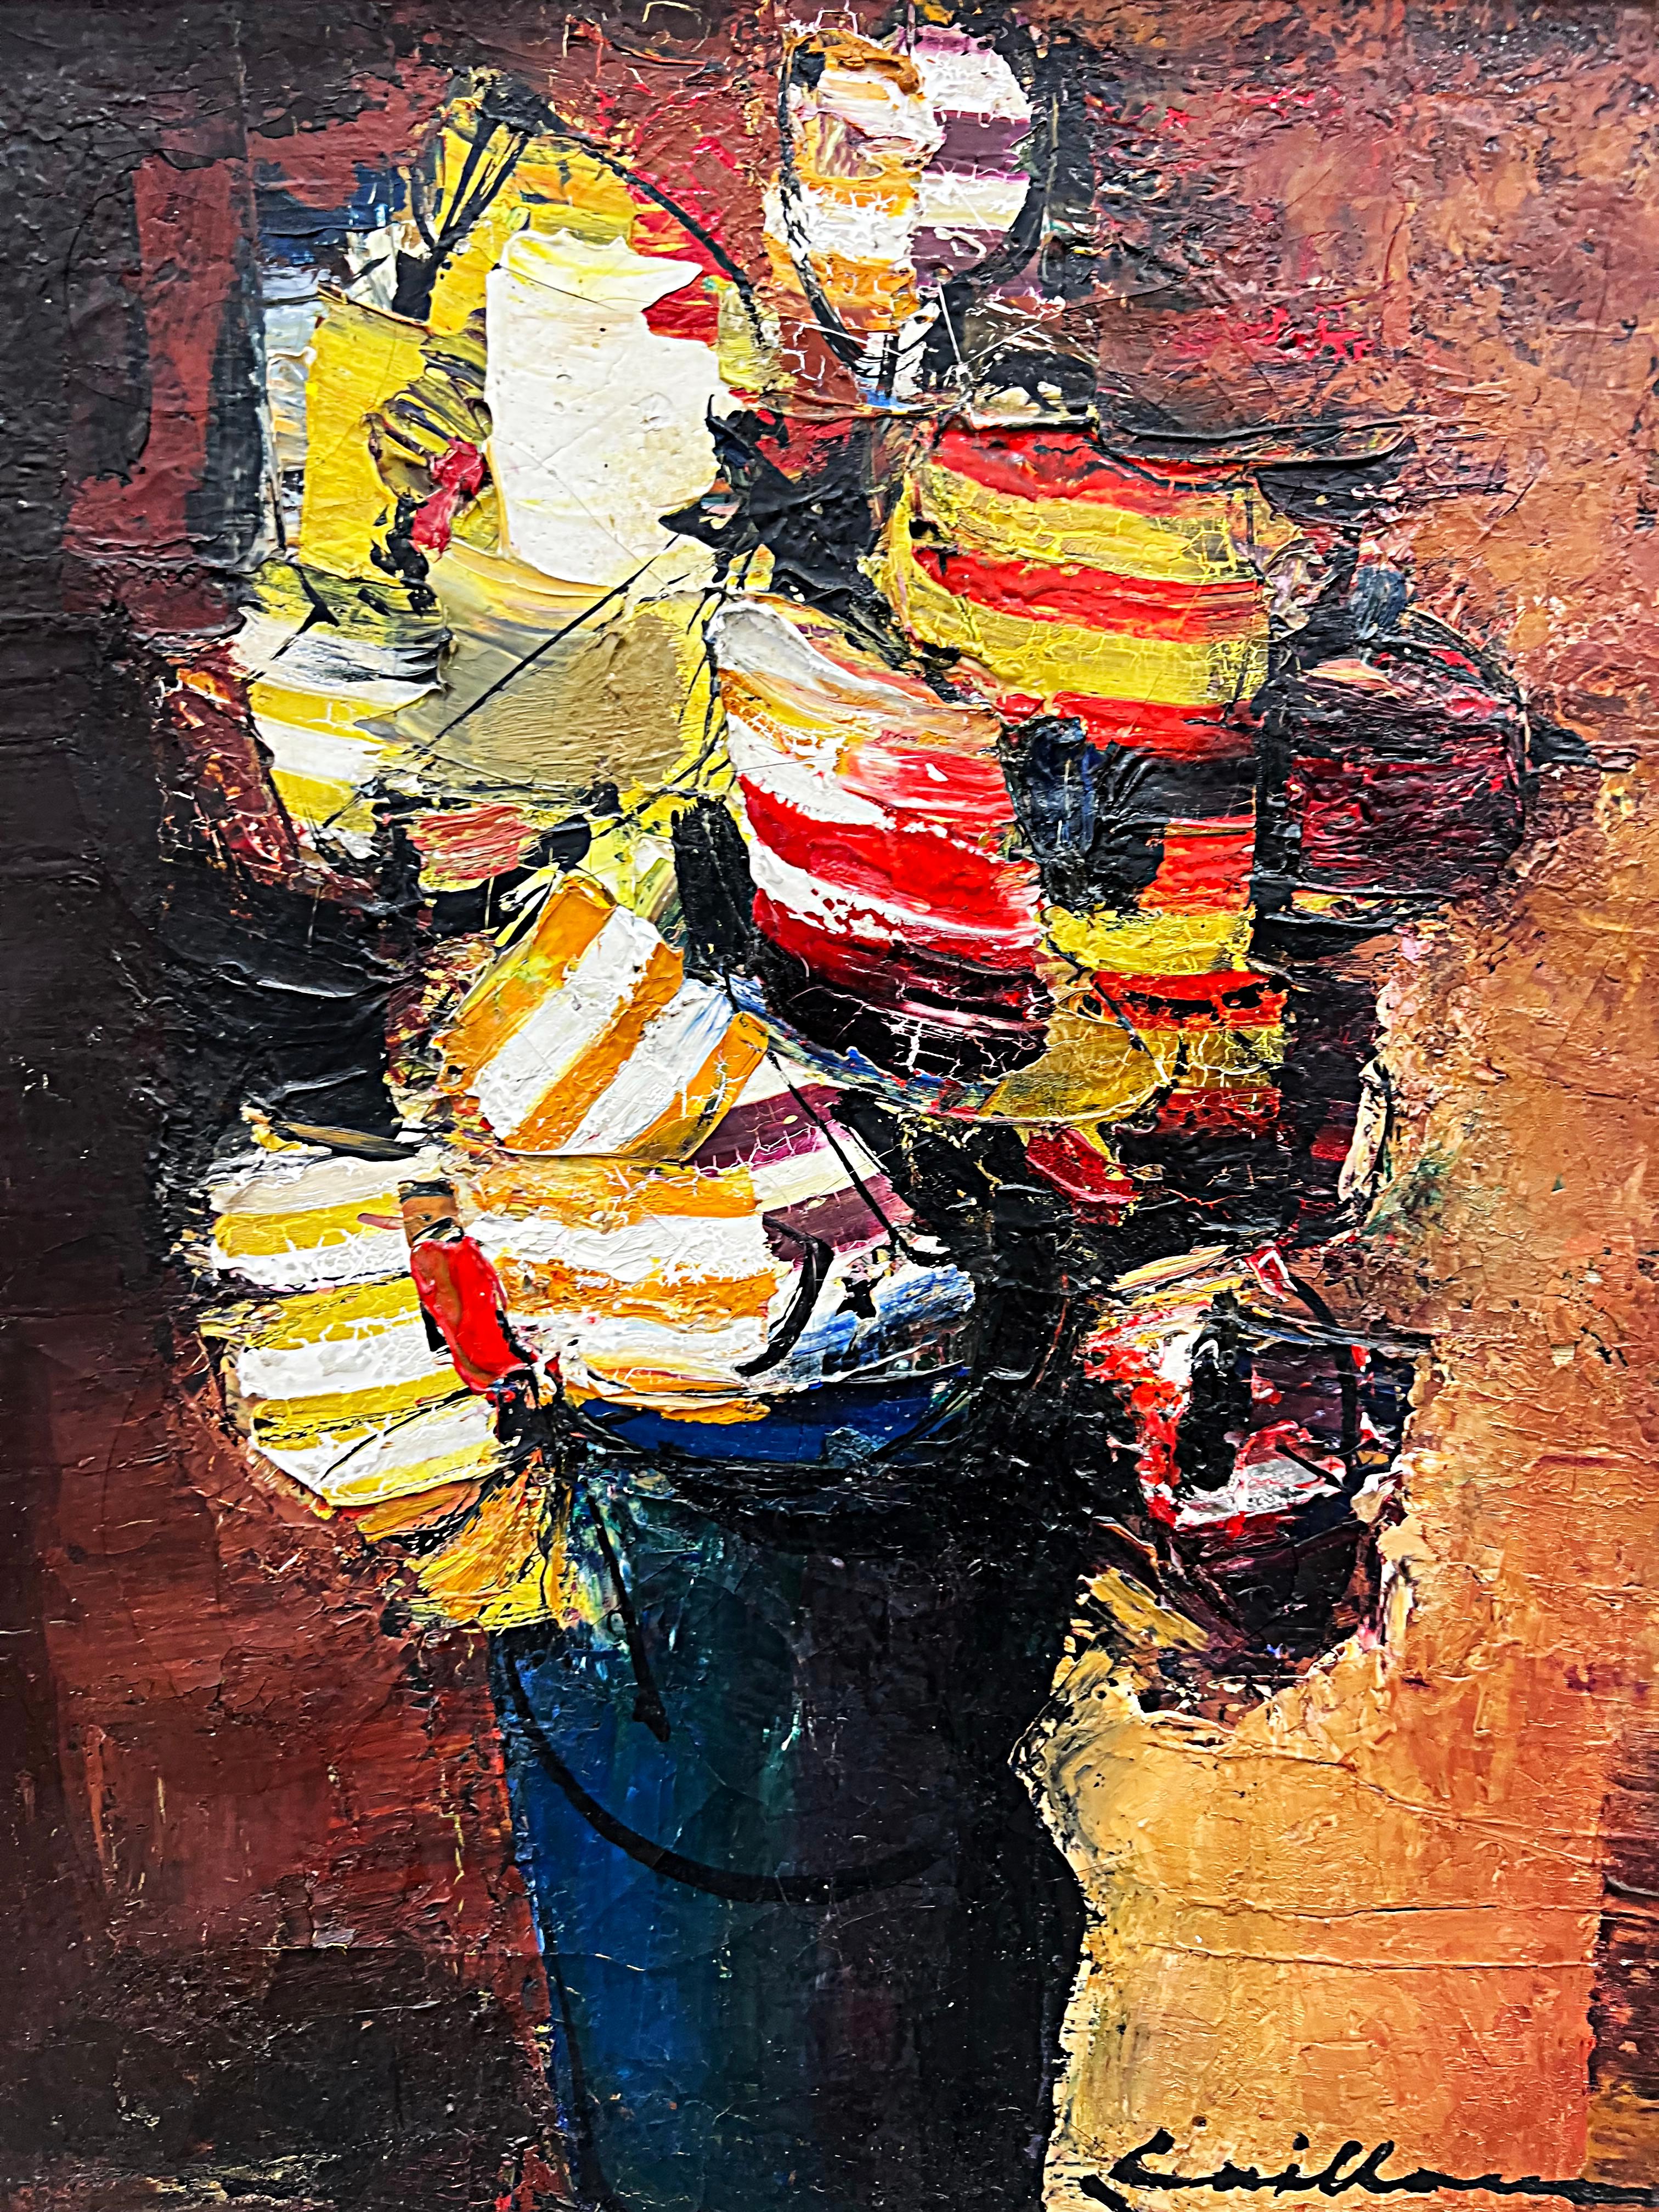 1950s French impressionist floral oil painting on canvas

Offered for sale is a 1950s French impressionist oil painting of a vase with colorful flowers. The painting has an excellent composition with the use of extremely heavy impasto palette